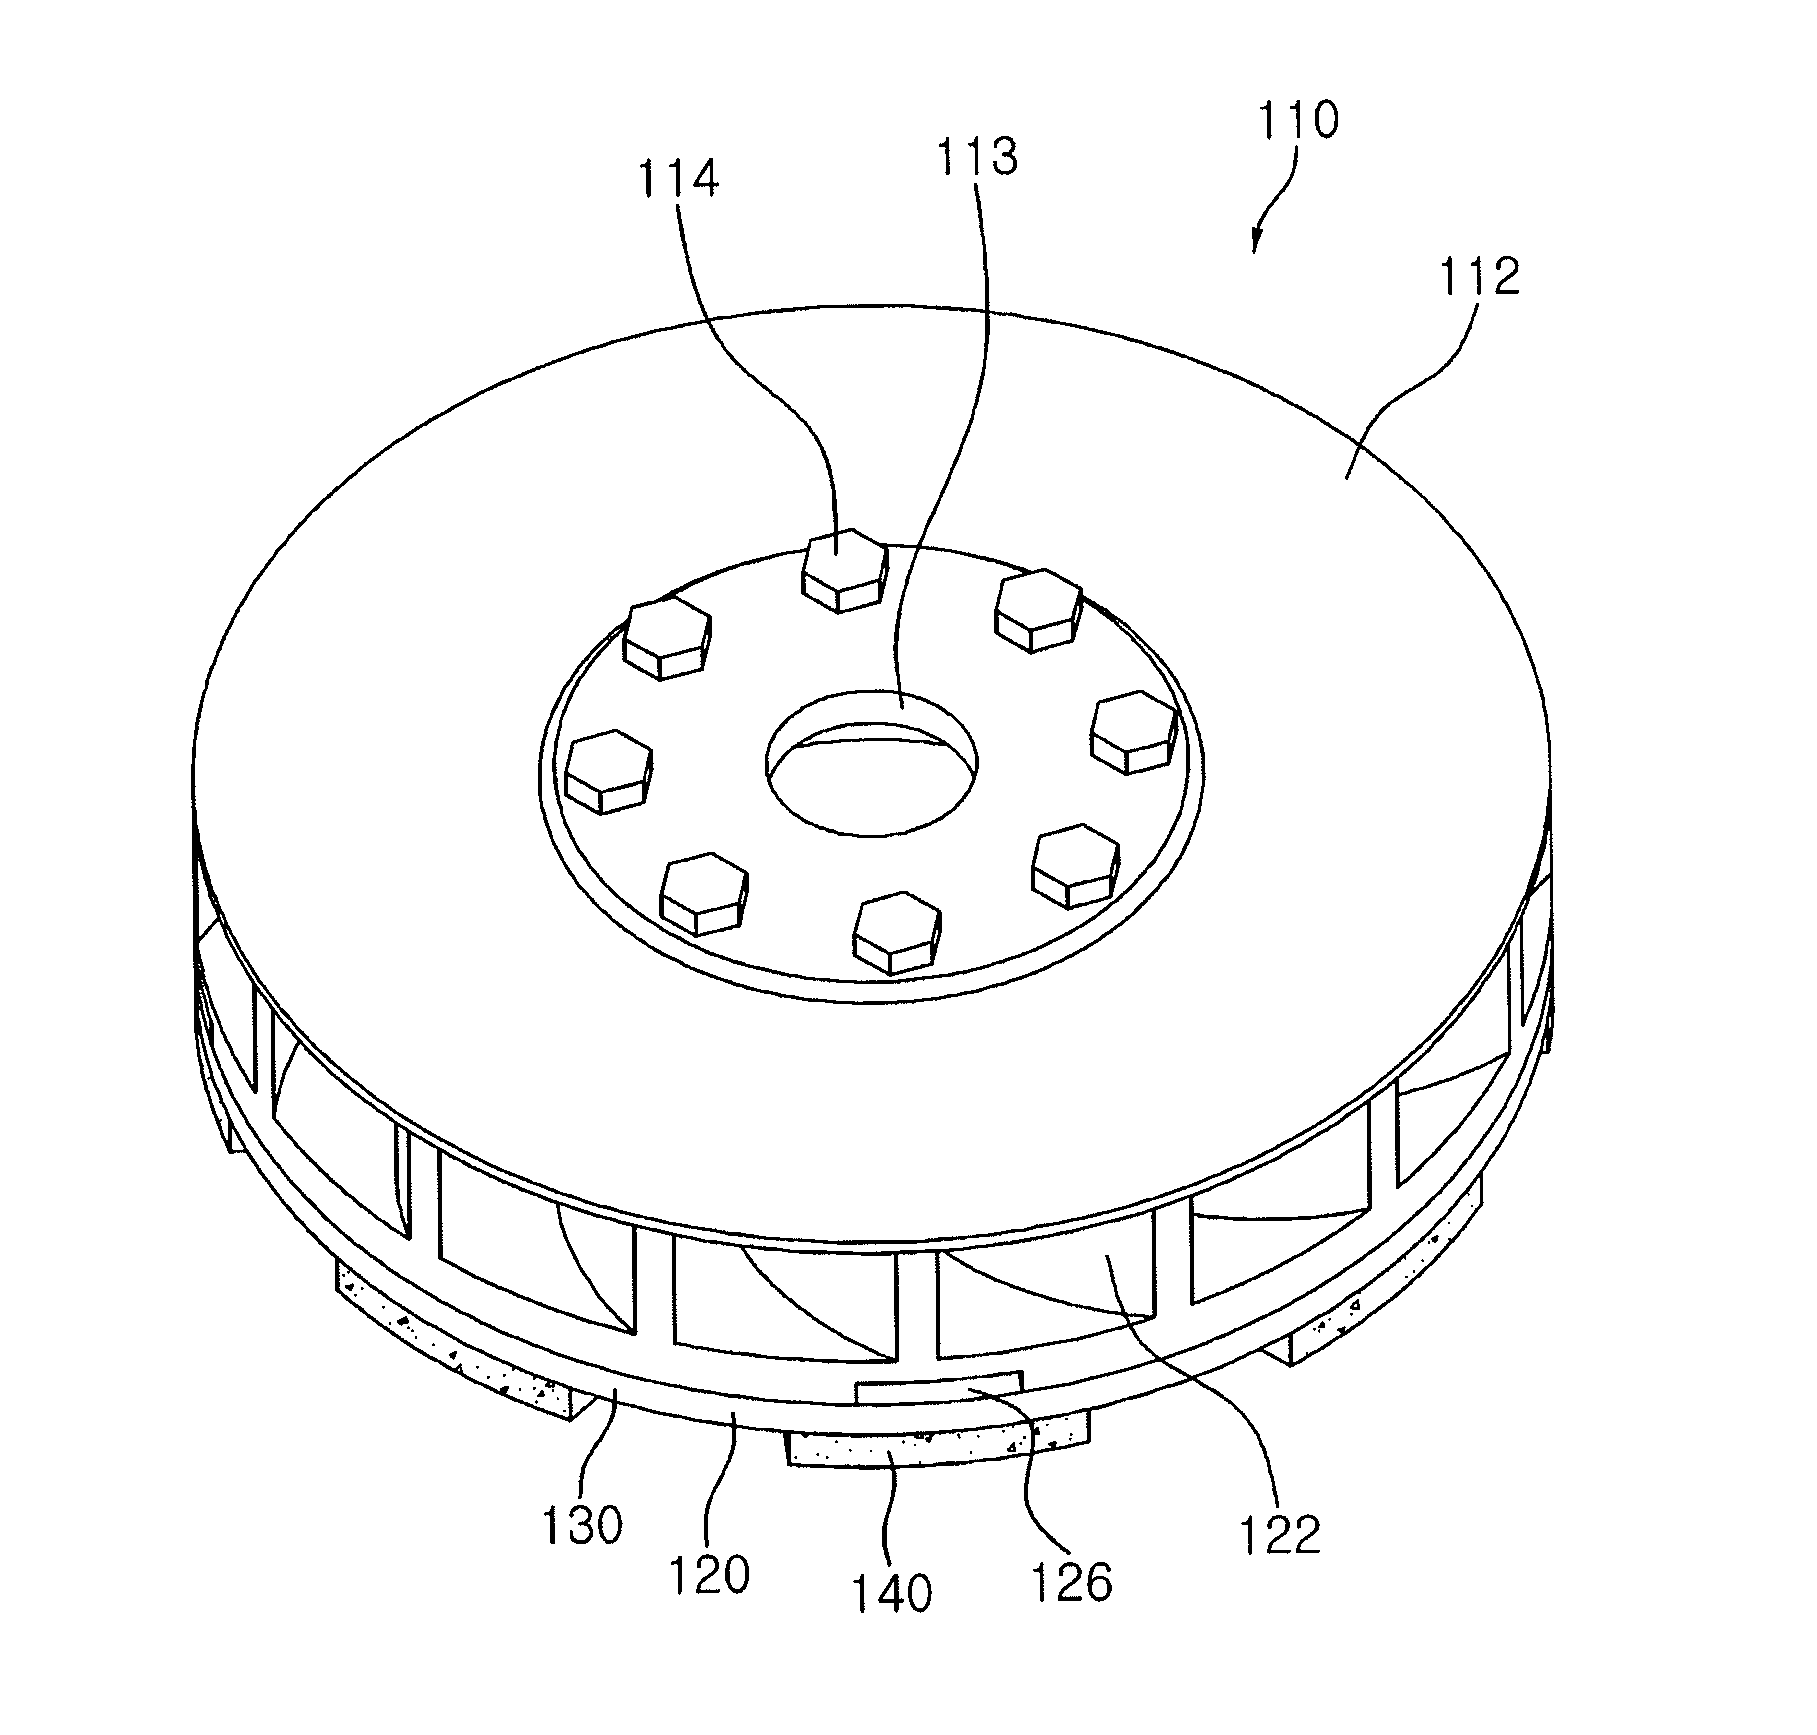 Grinding tool adapted to collect grinding particles